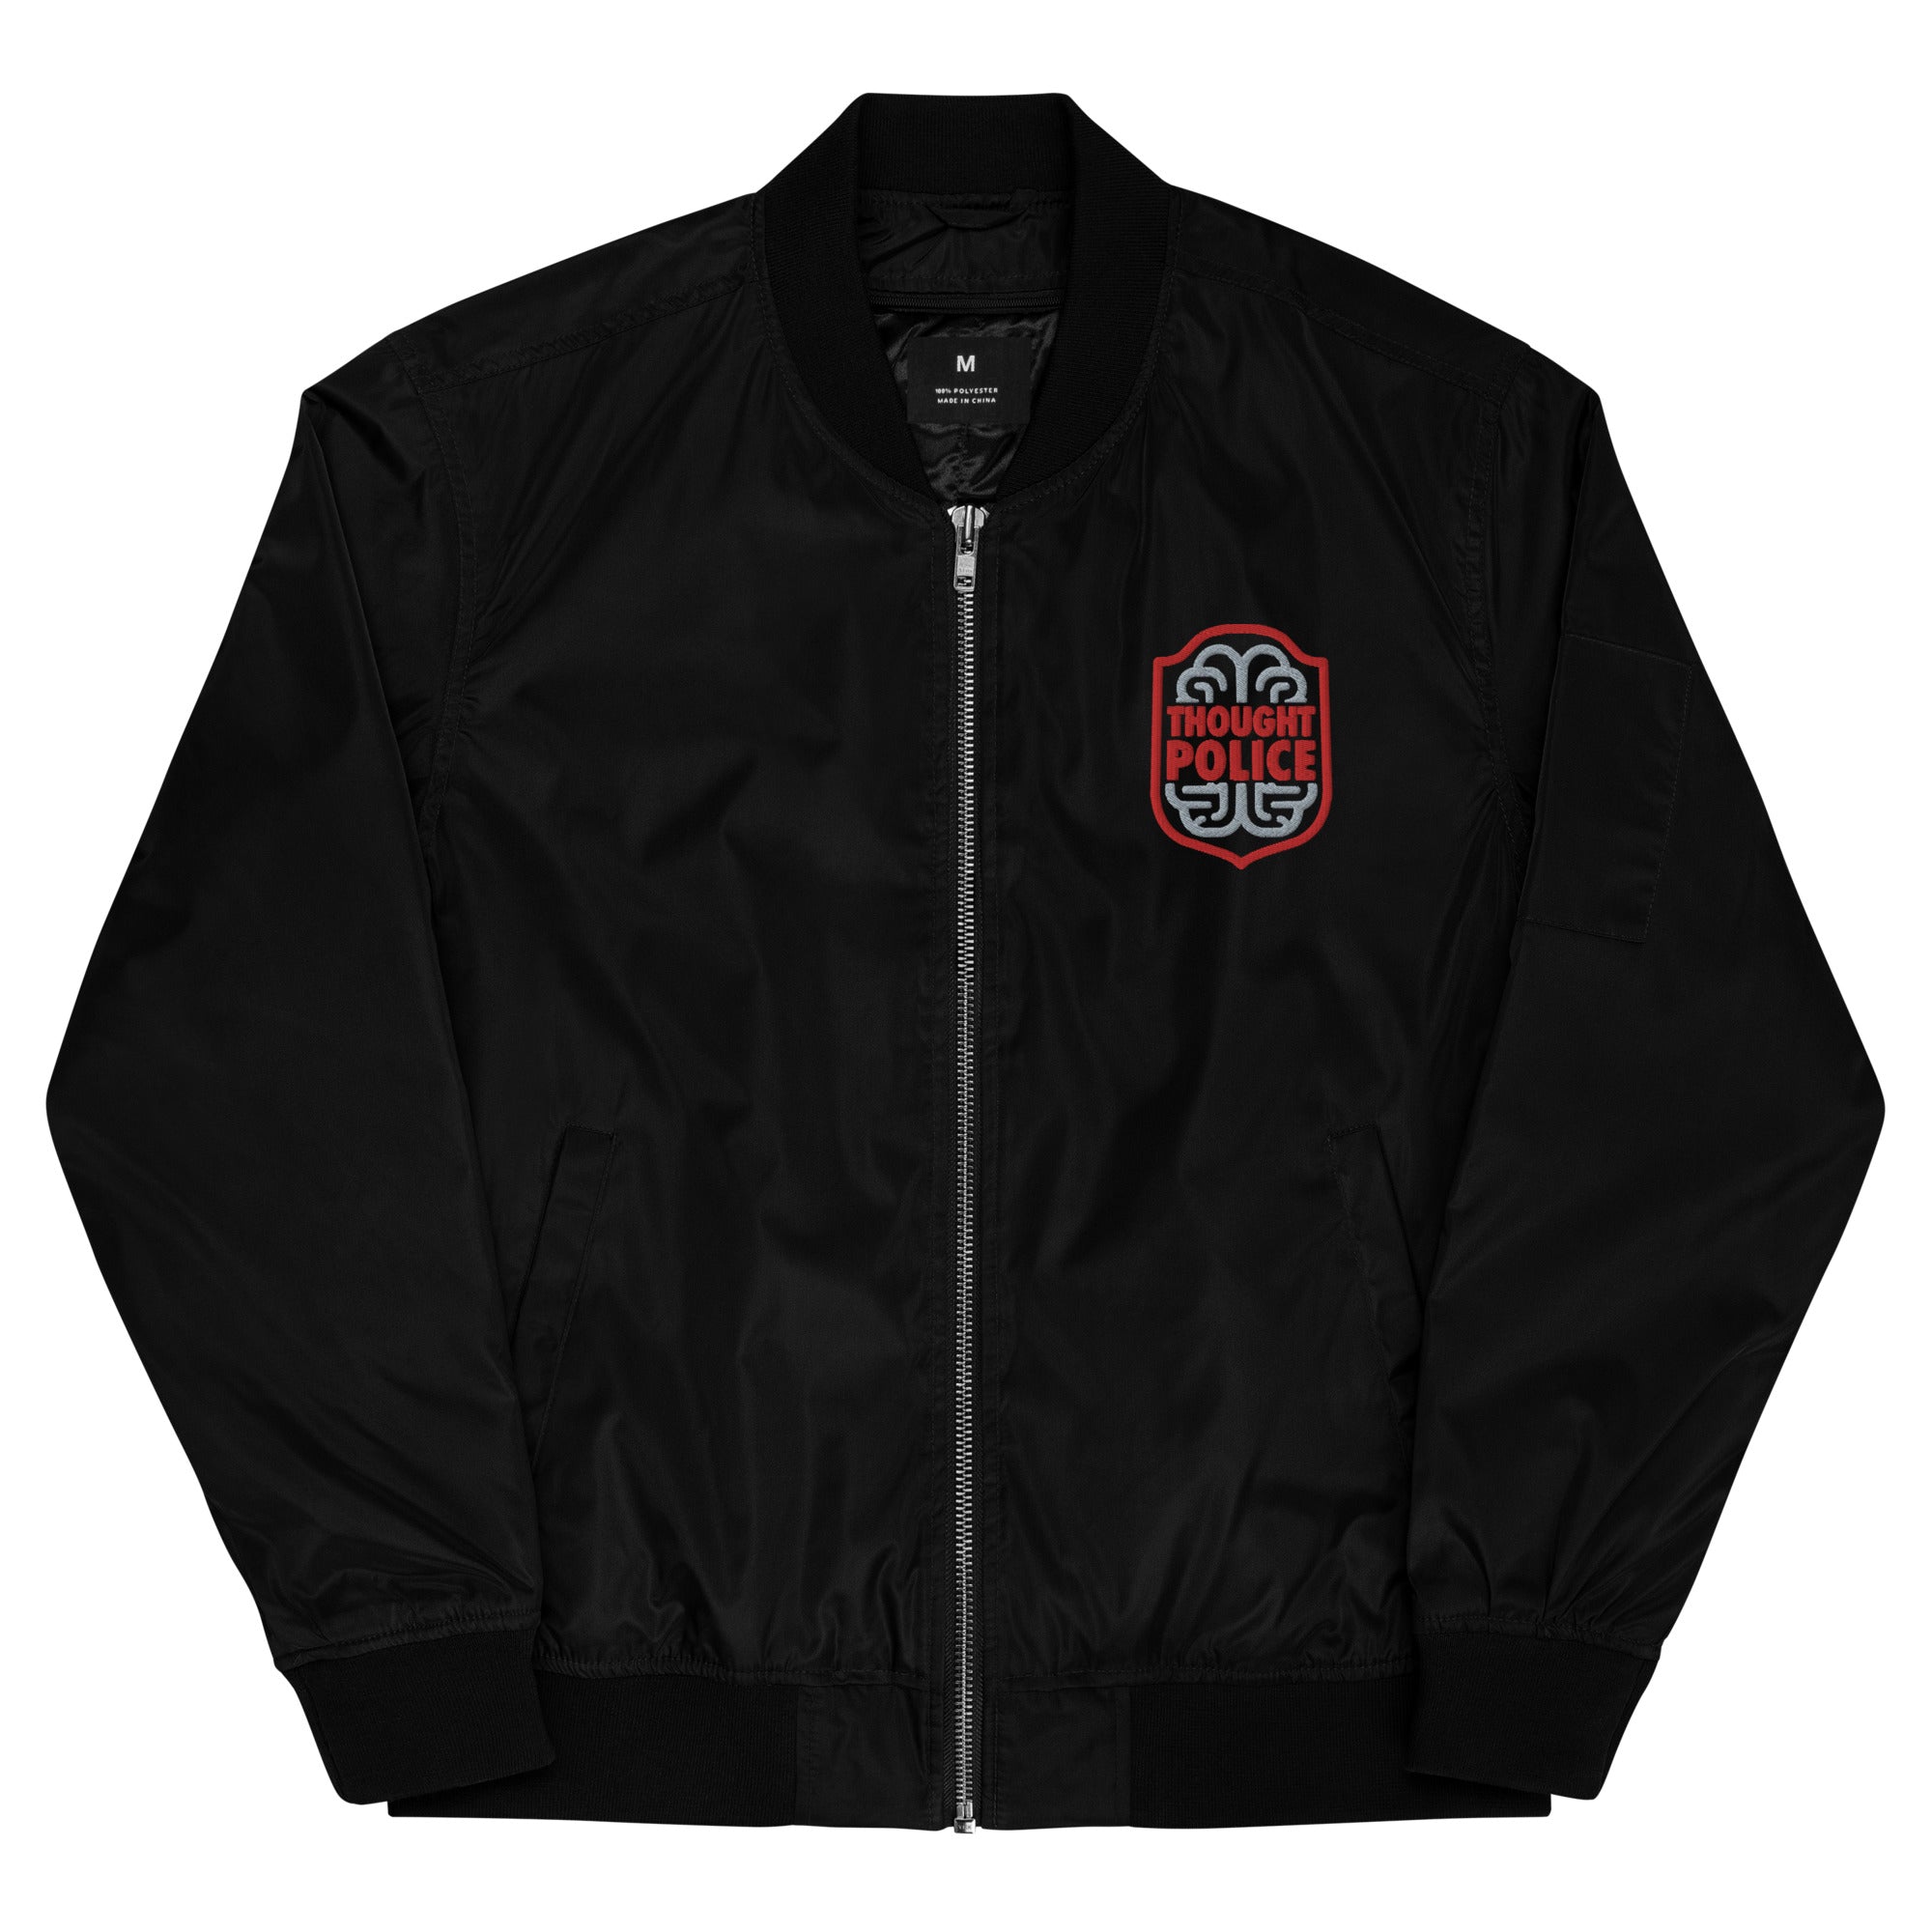 Thought Police Recycled bomber jacket